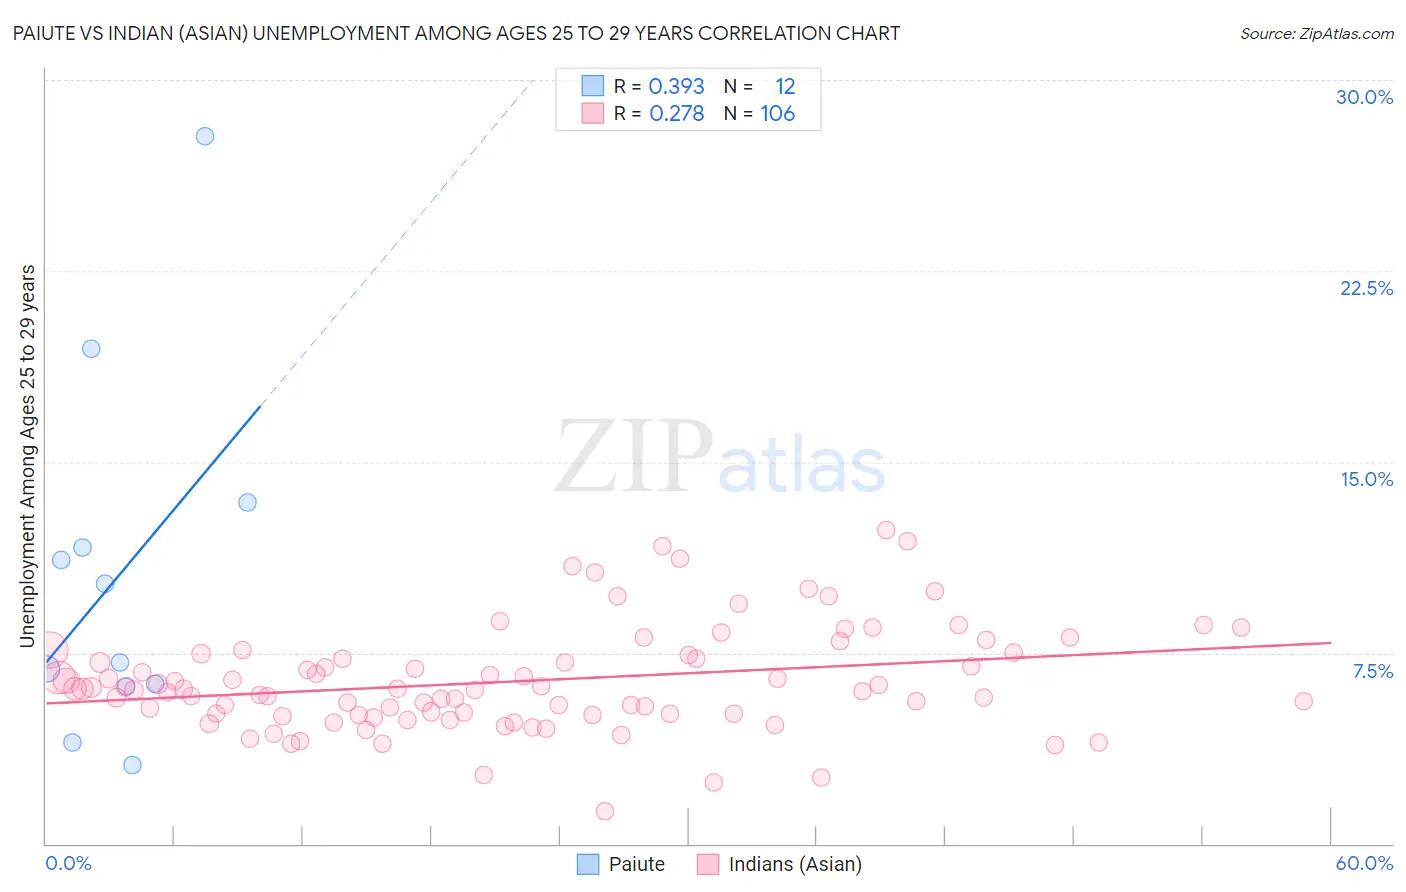 Paiute vs Indian (Asian) Unemployment Among Ages 25 to 29 years